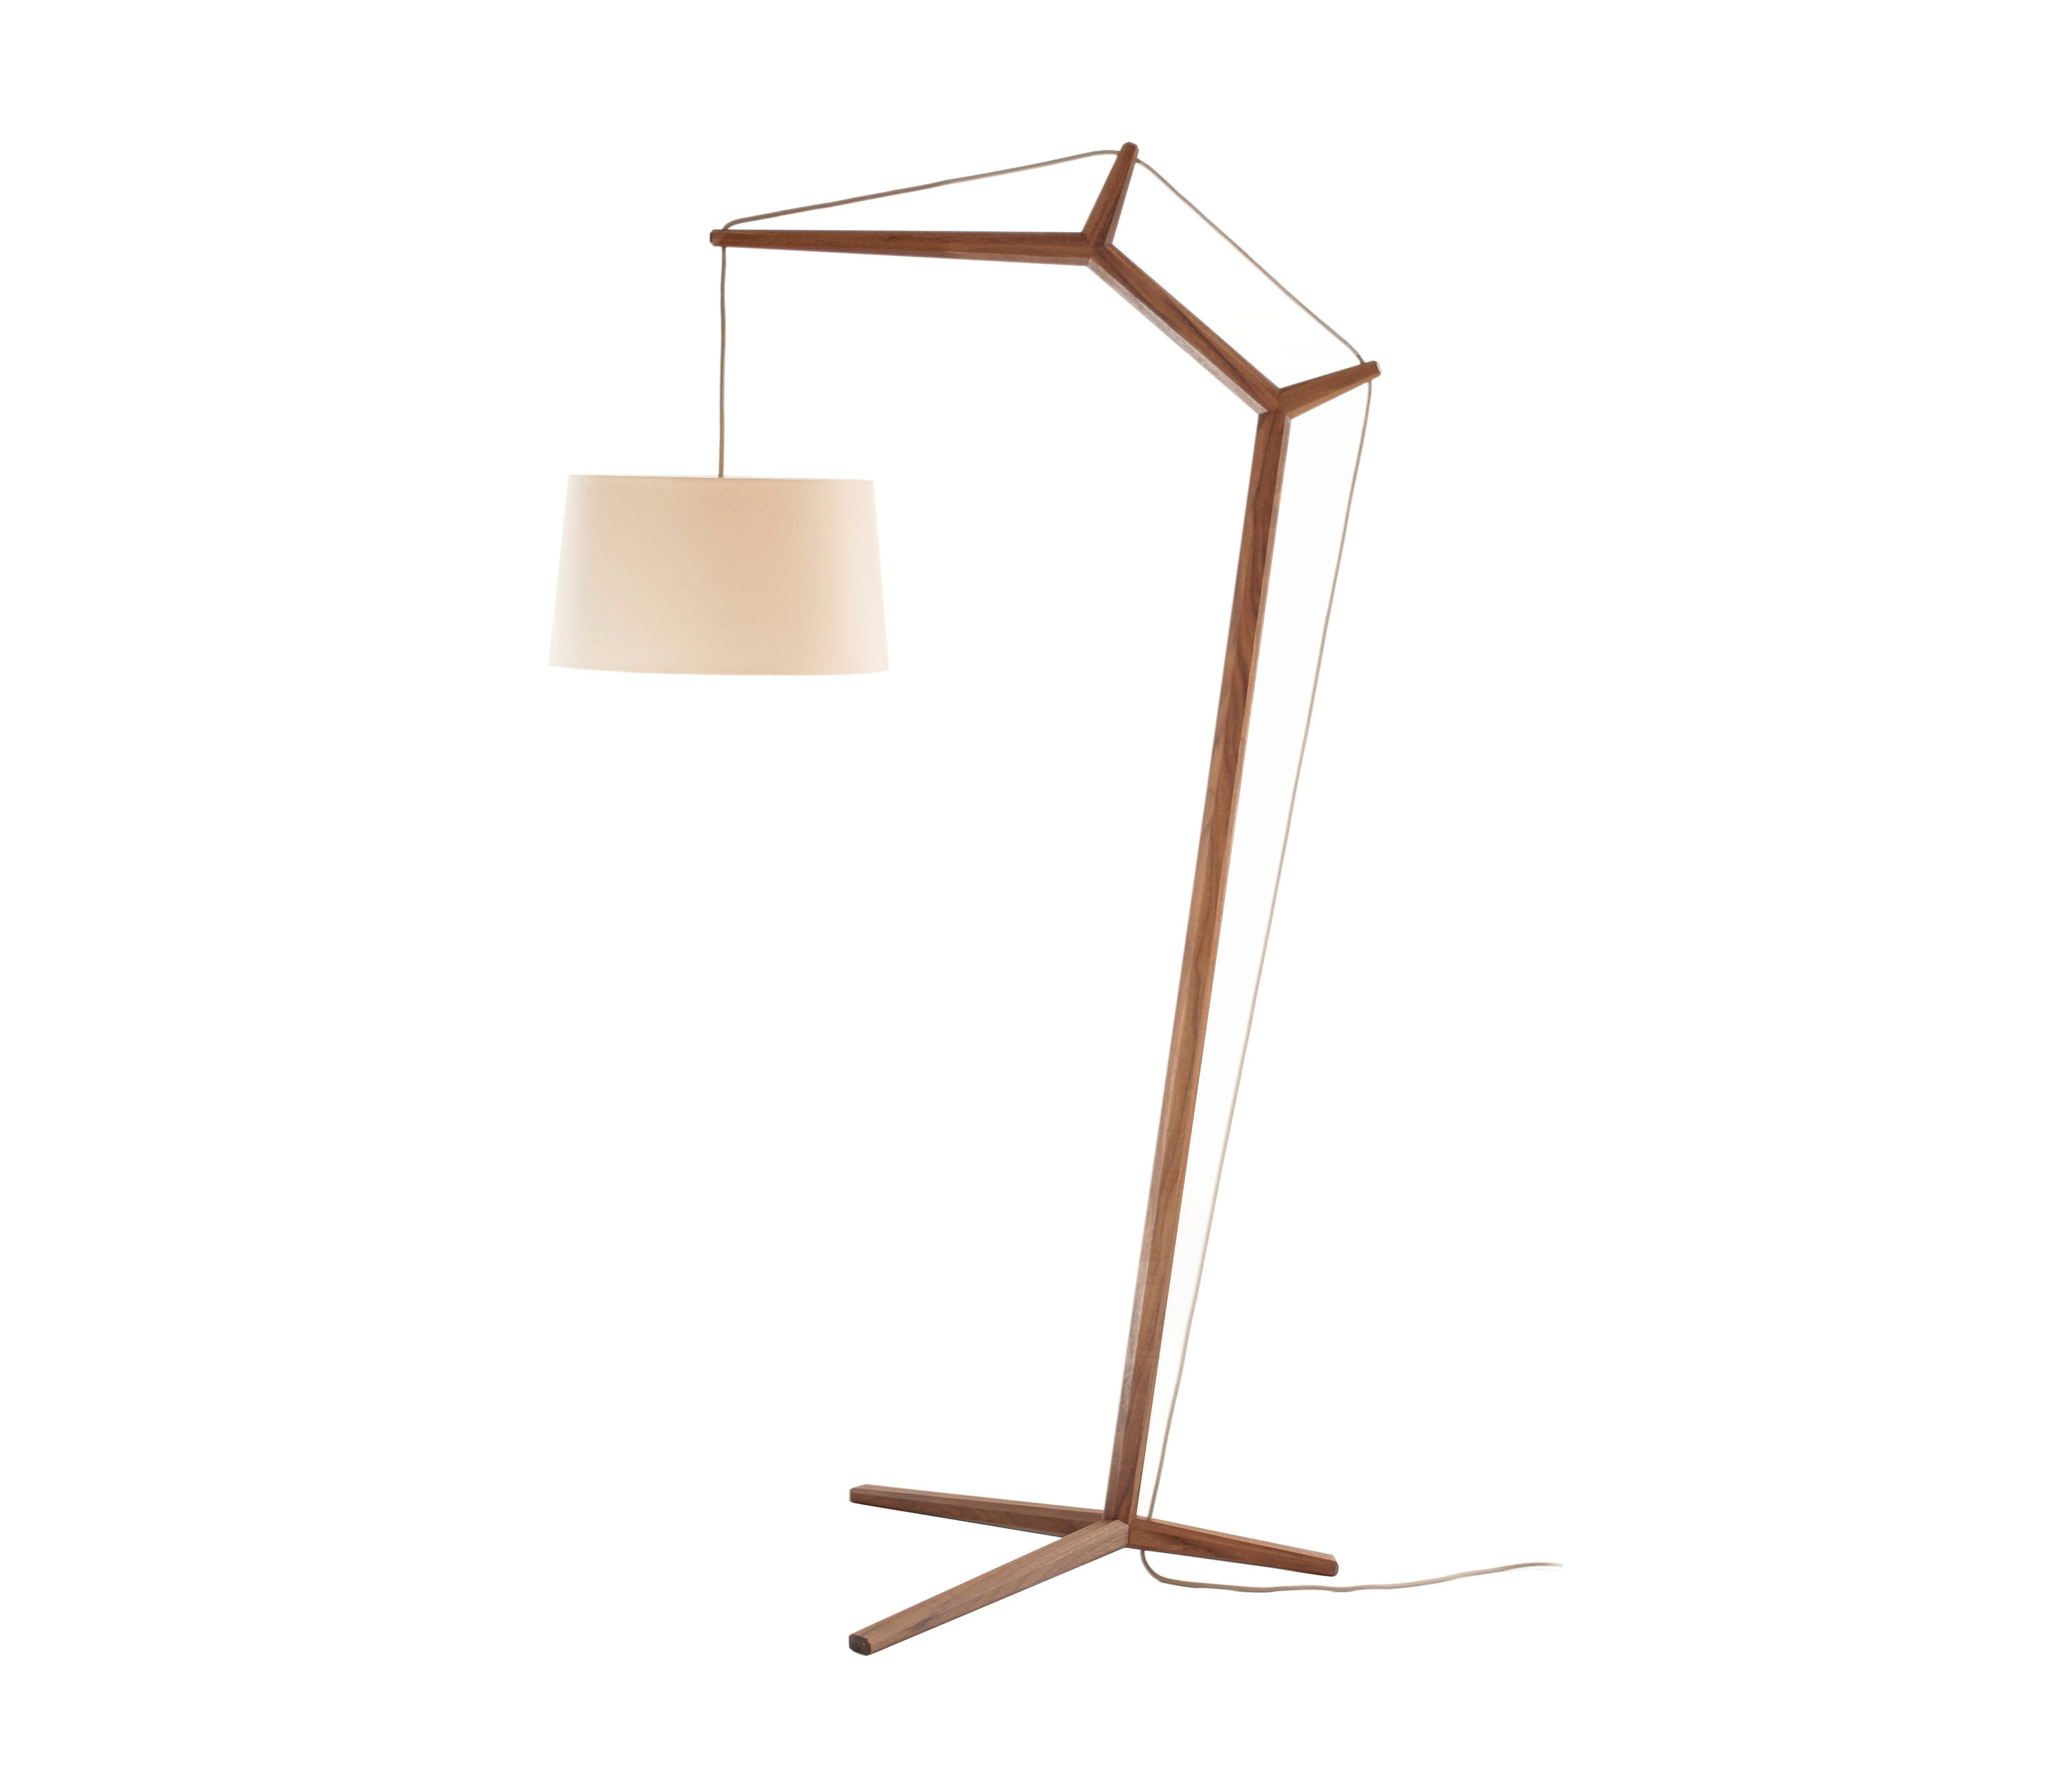 Puu Floor Lamp Free Standing Lights From Mhpd Architonic inside proportions 3000 X 2564